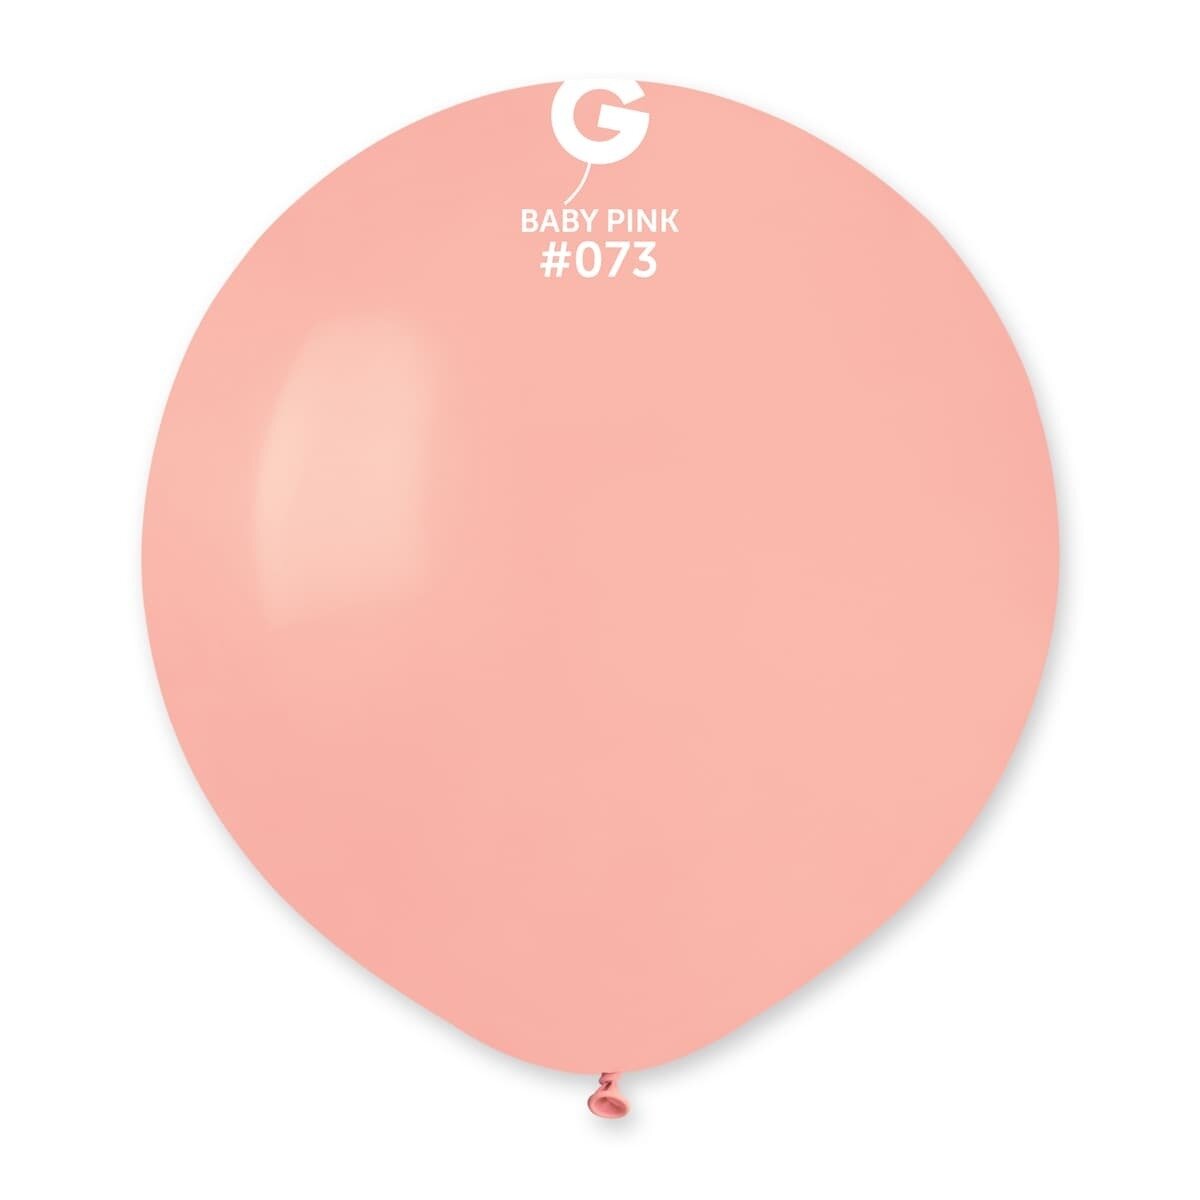 G30: #073 Baby Pink 329926 Standard Color 31 in